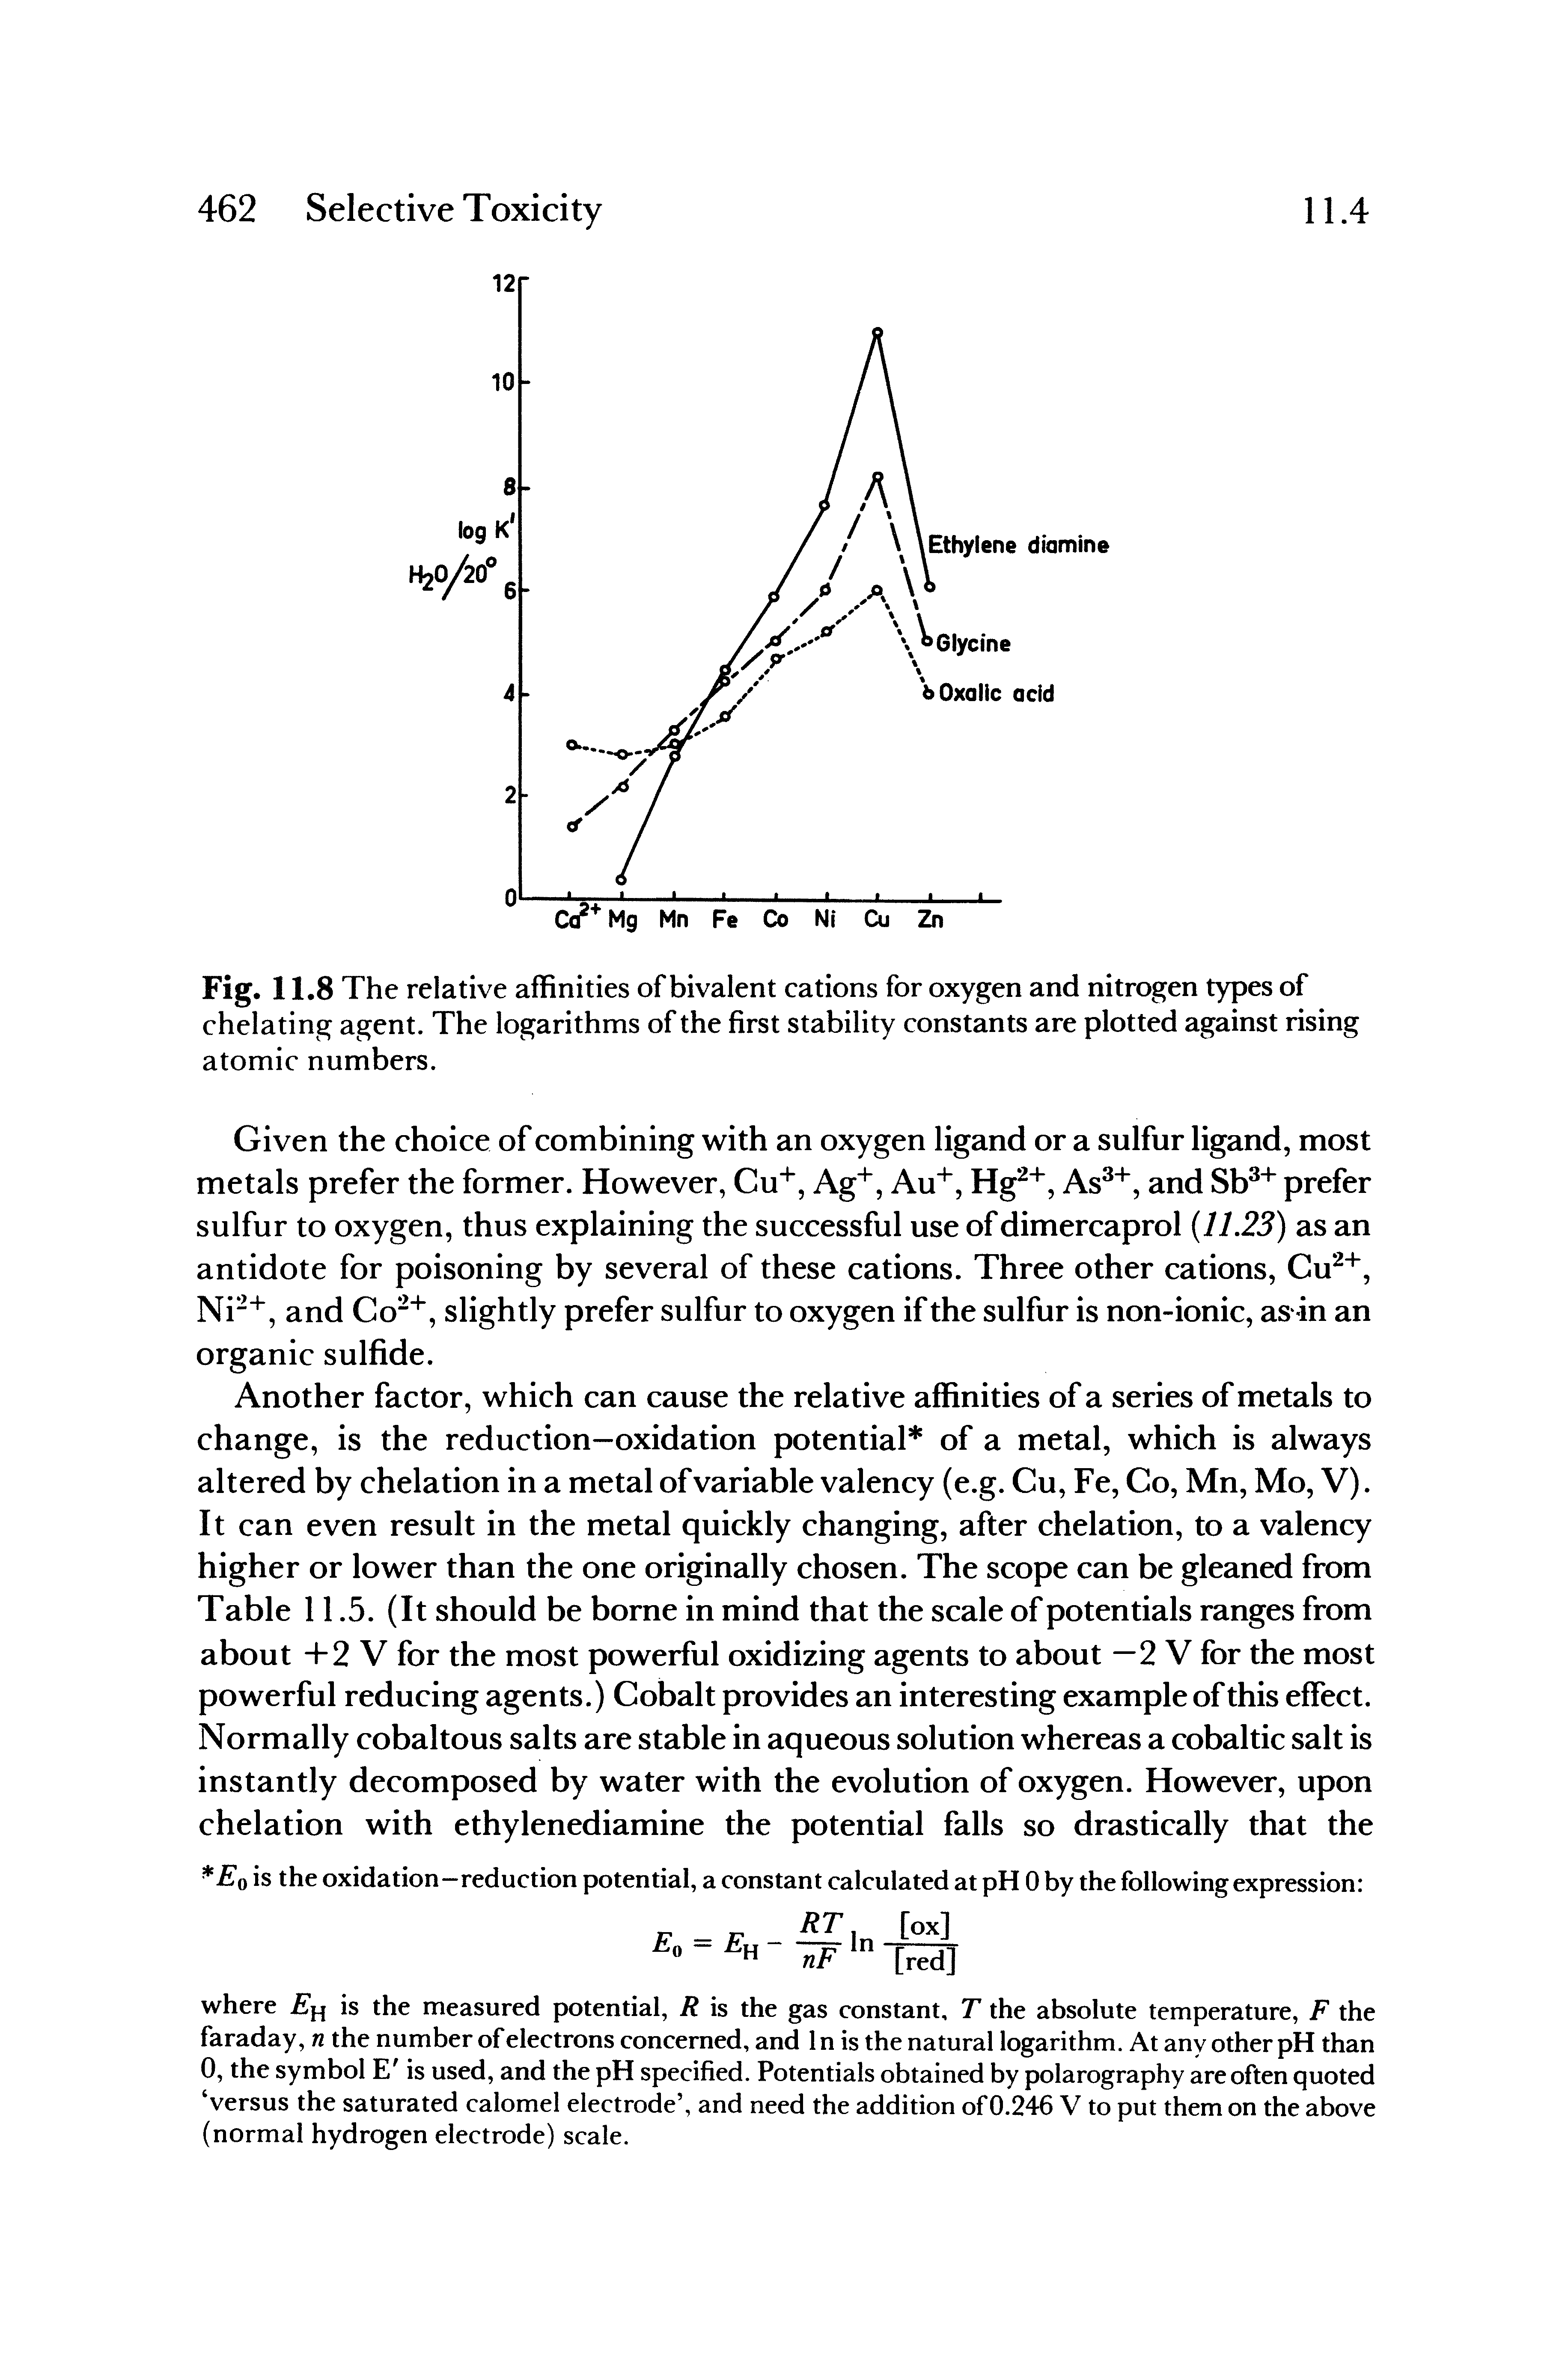 Fig. 11.8 The relative affinities of bivalent cations for oxygen and nitrogen types of chelating agent. The logarithms of the first stability constants are plotted against rising atomic numbers.